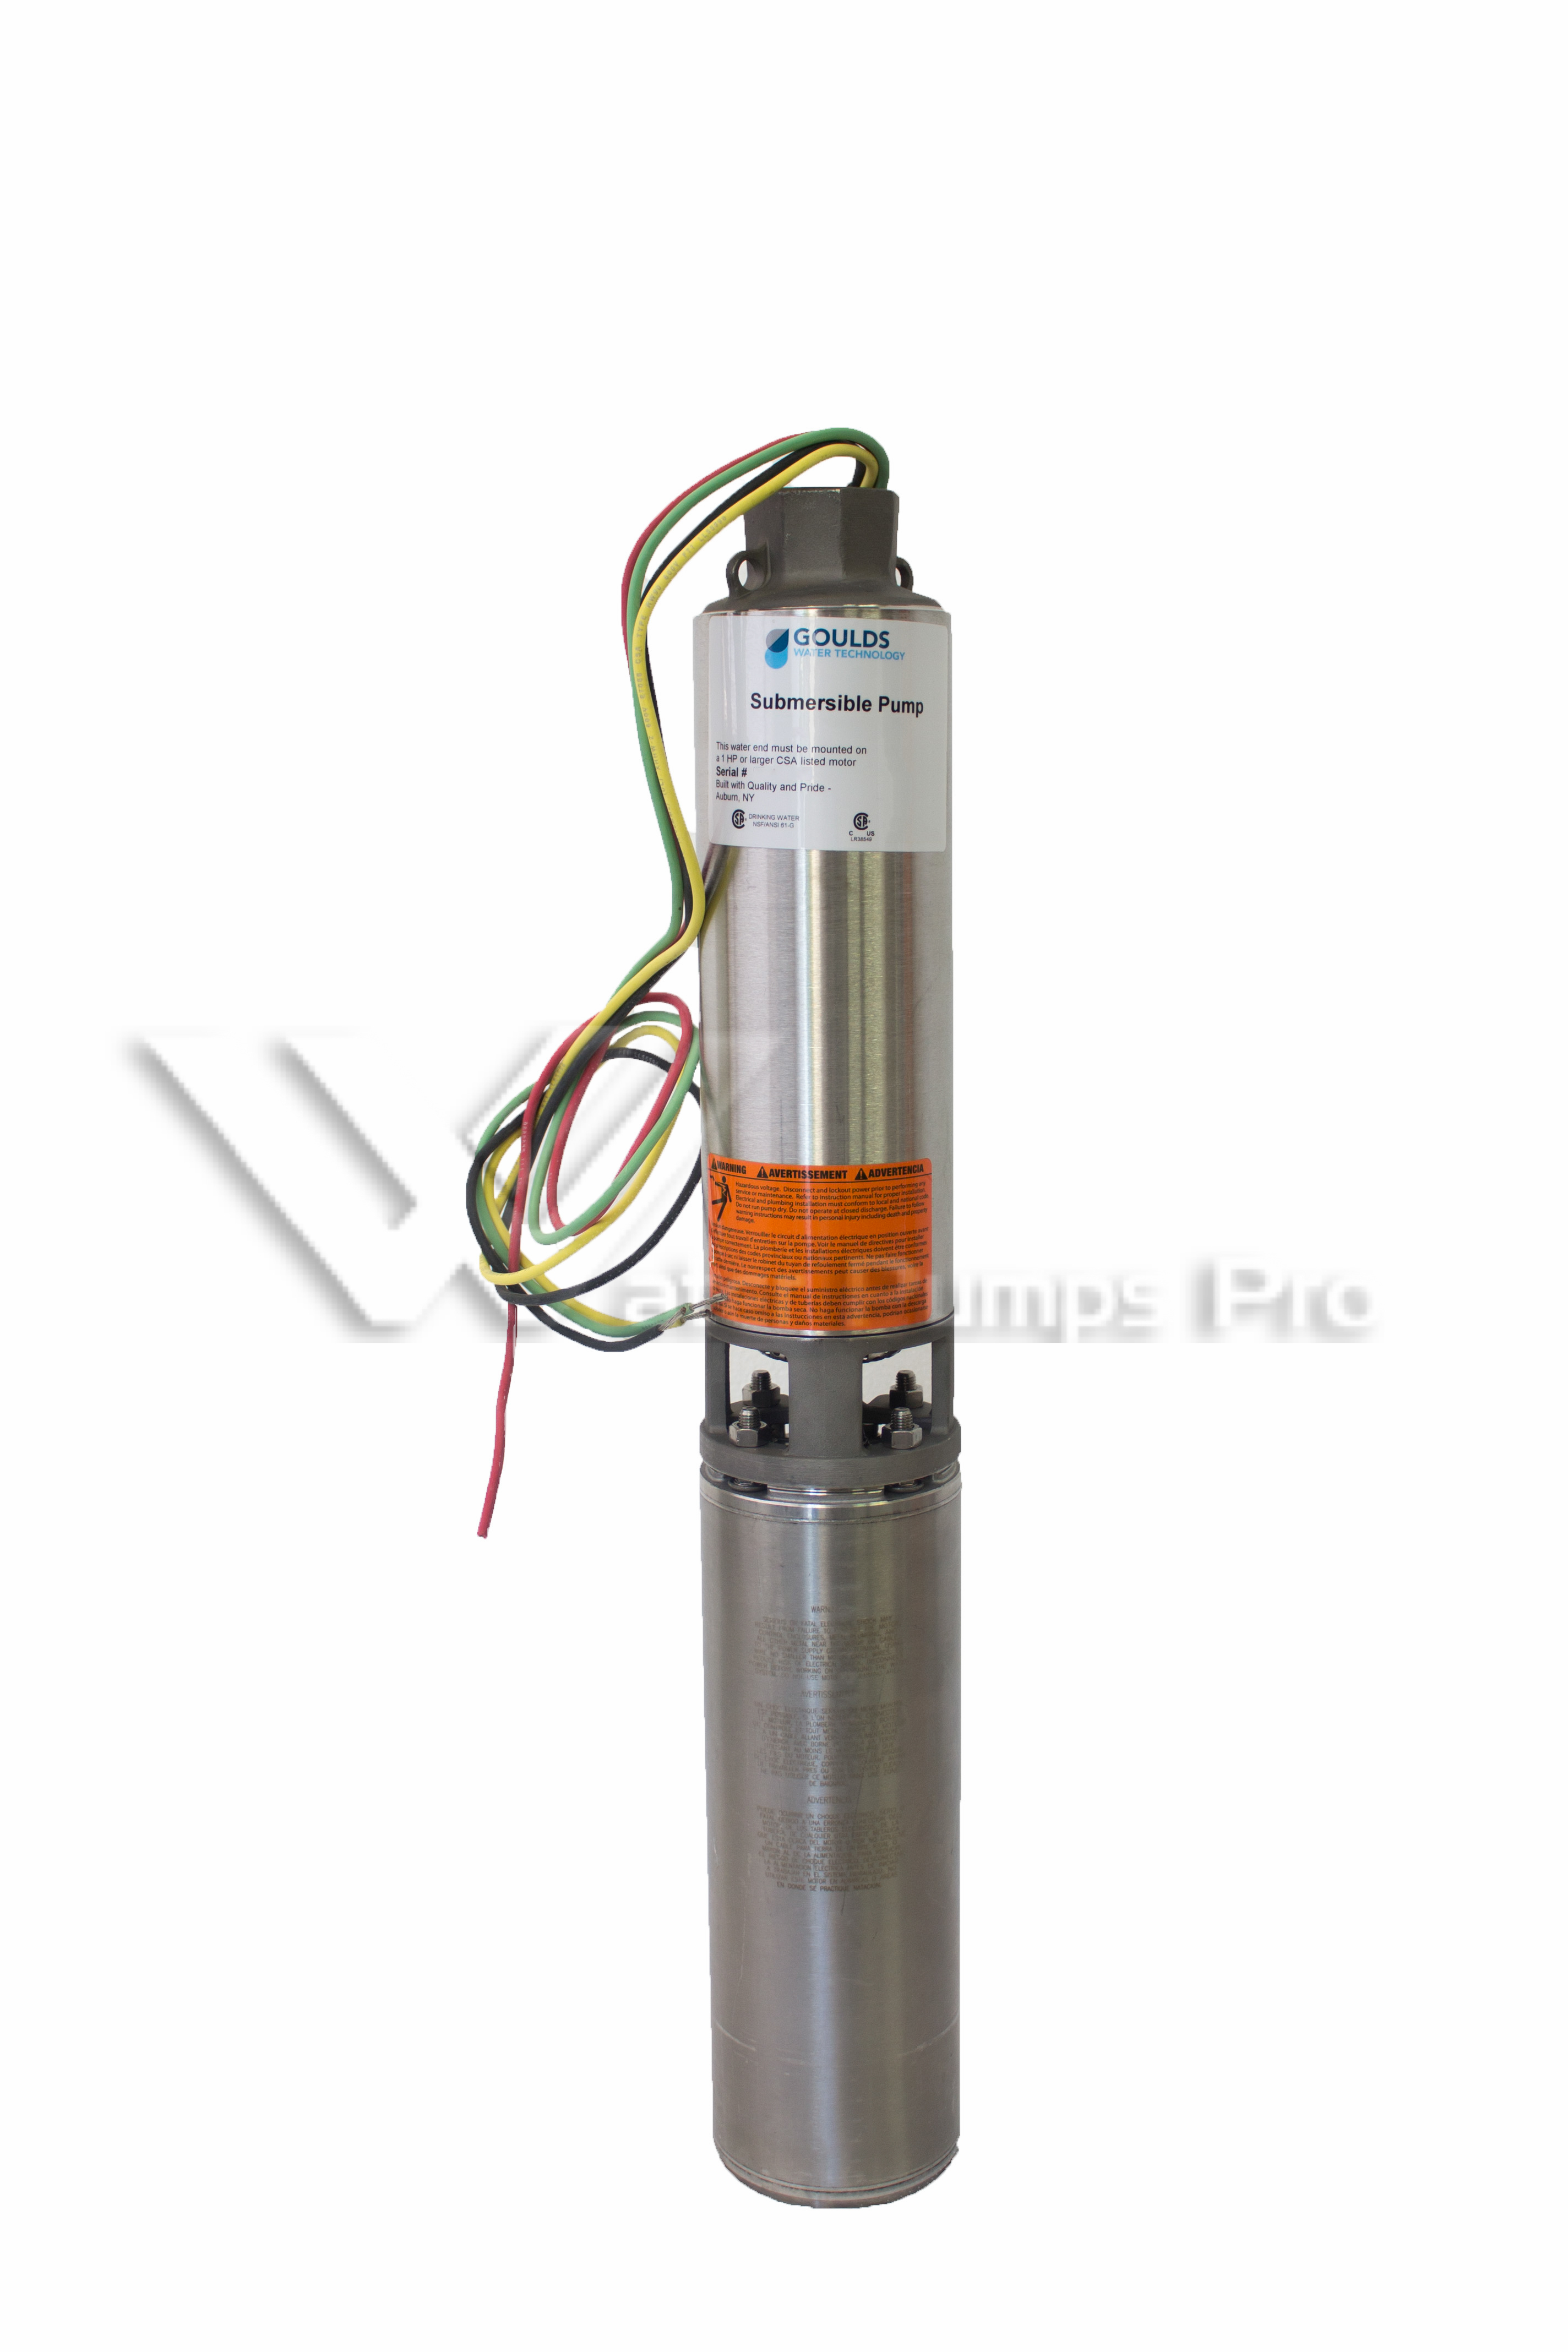 Goulds 10GS05411CL 10GPM 1/2HP 115V 3Wire submersible well pump